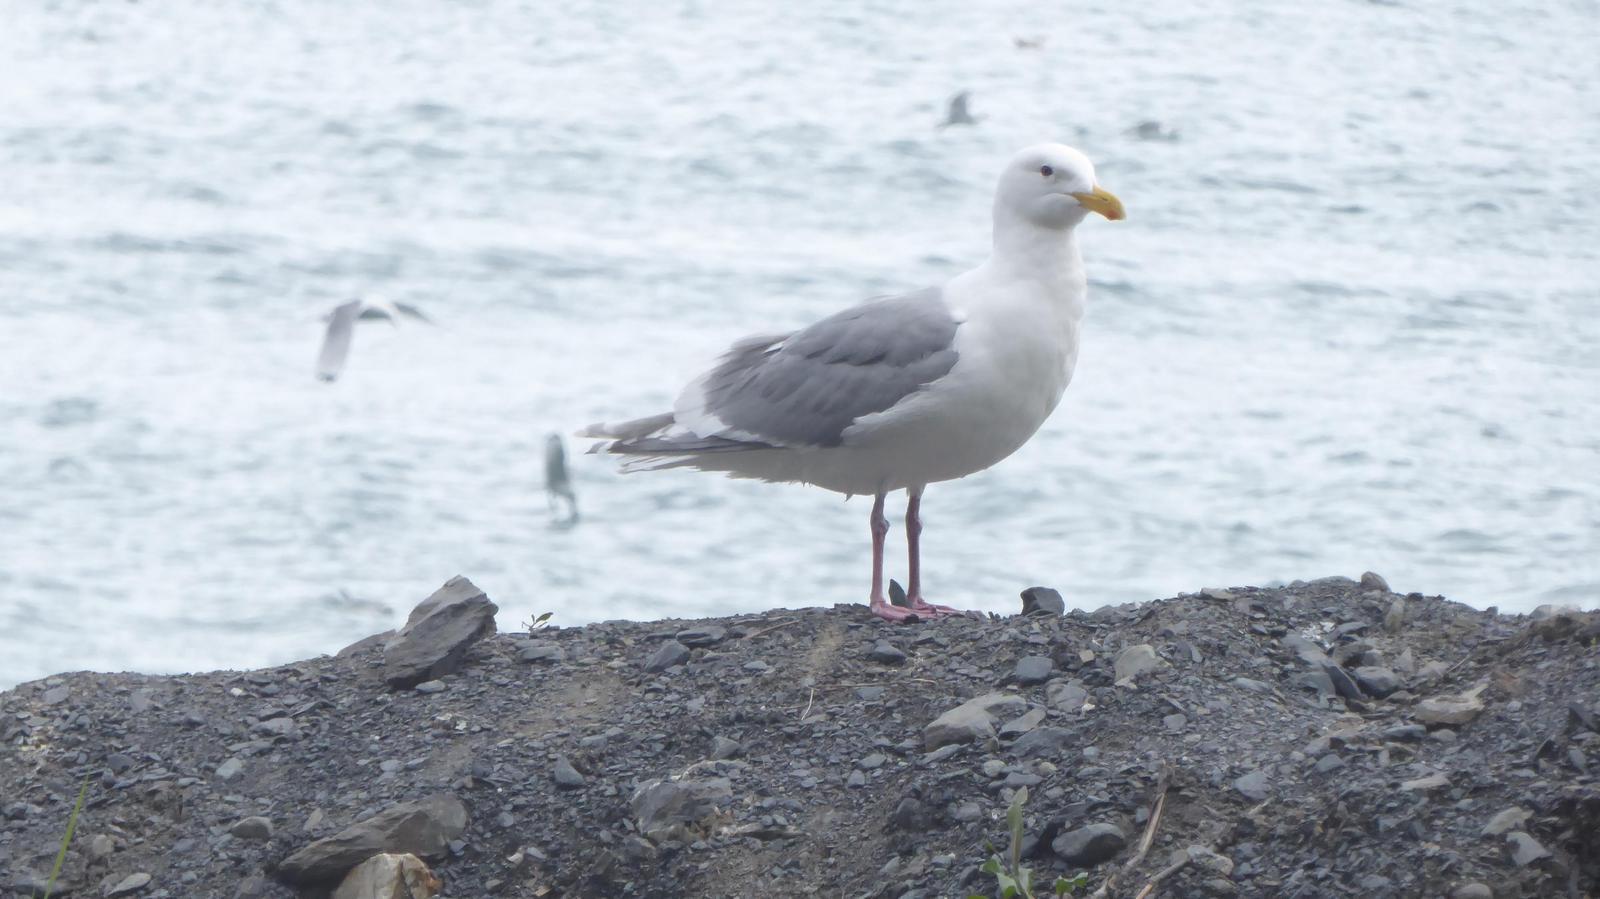 Glaucous-winged Gull Photo by Daliel Leite